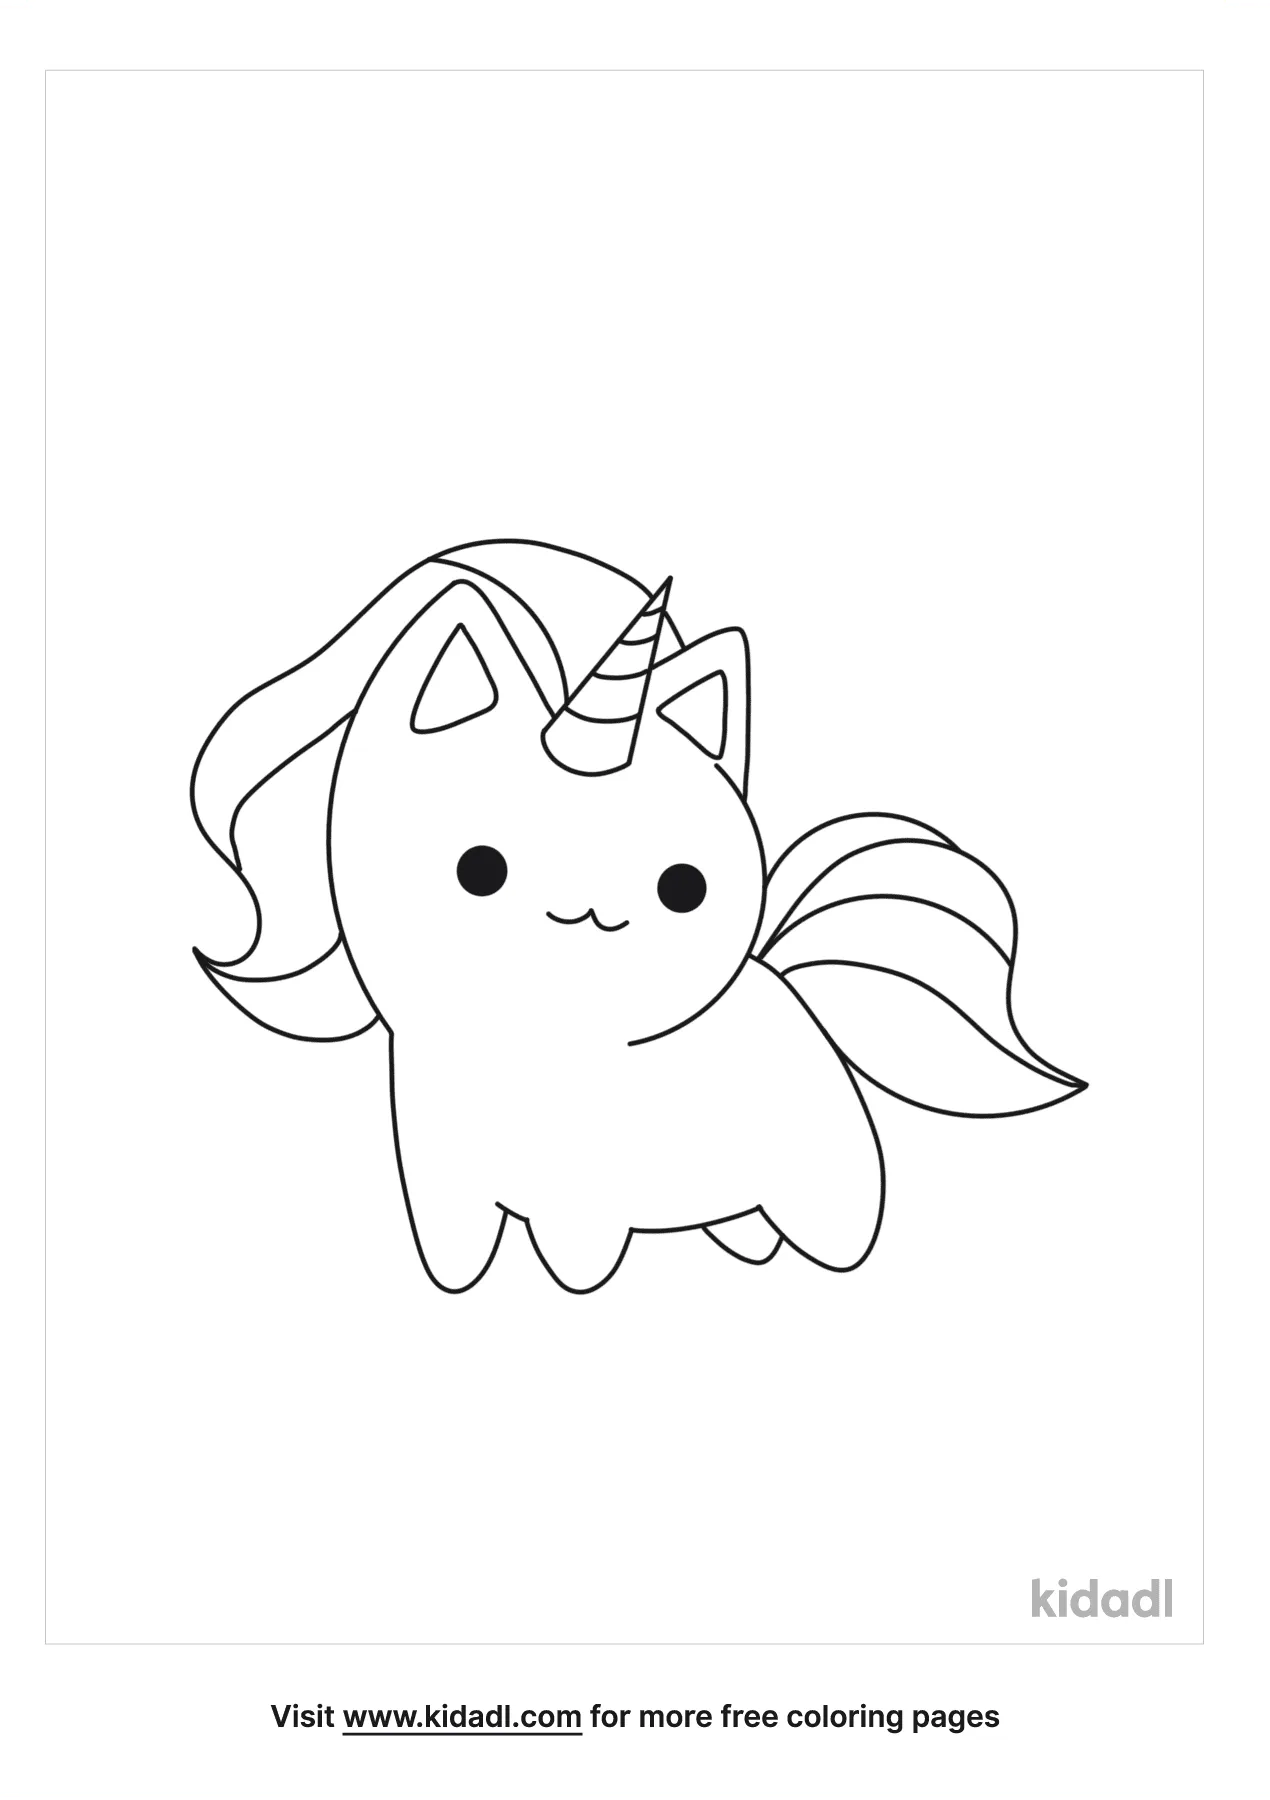 unicorn cat coloring page free unicorns coloring page kidadl